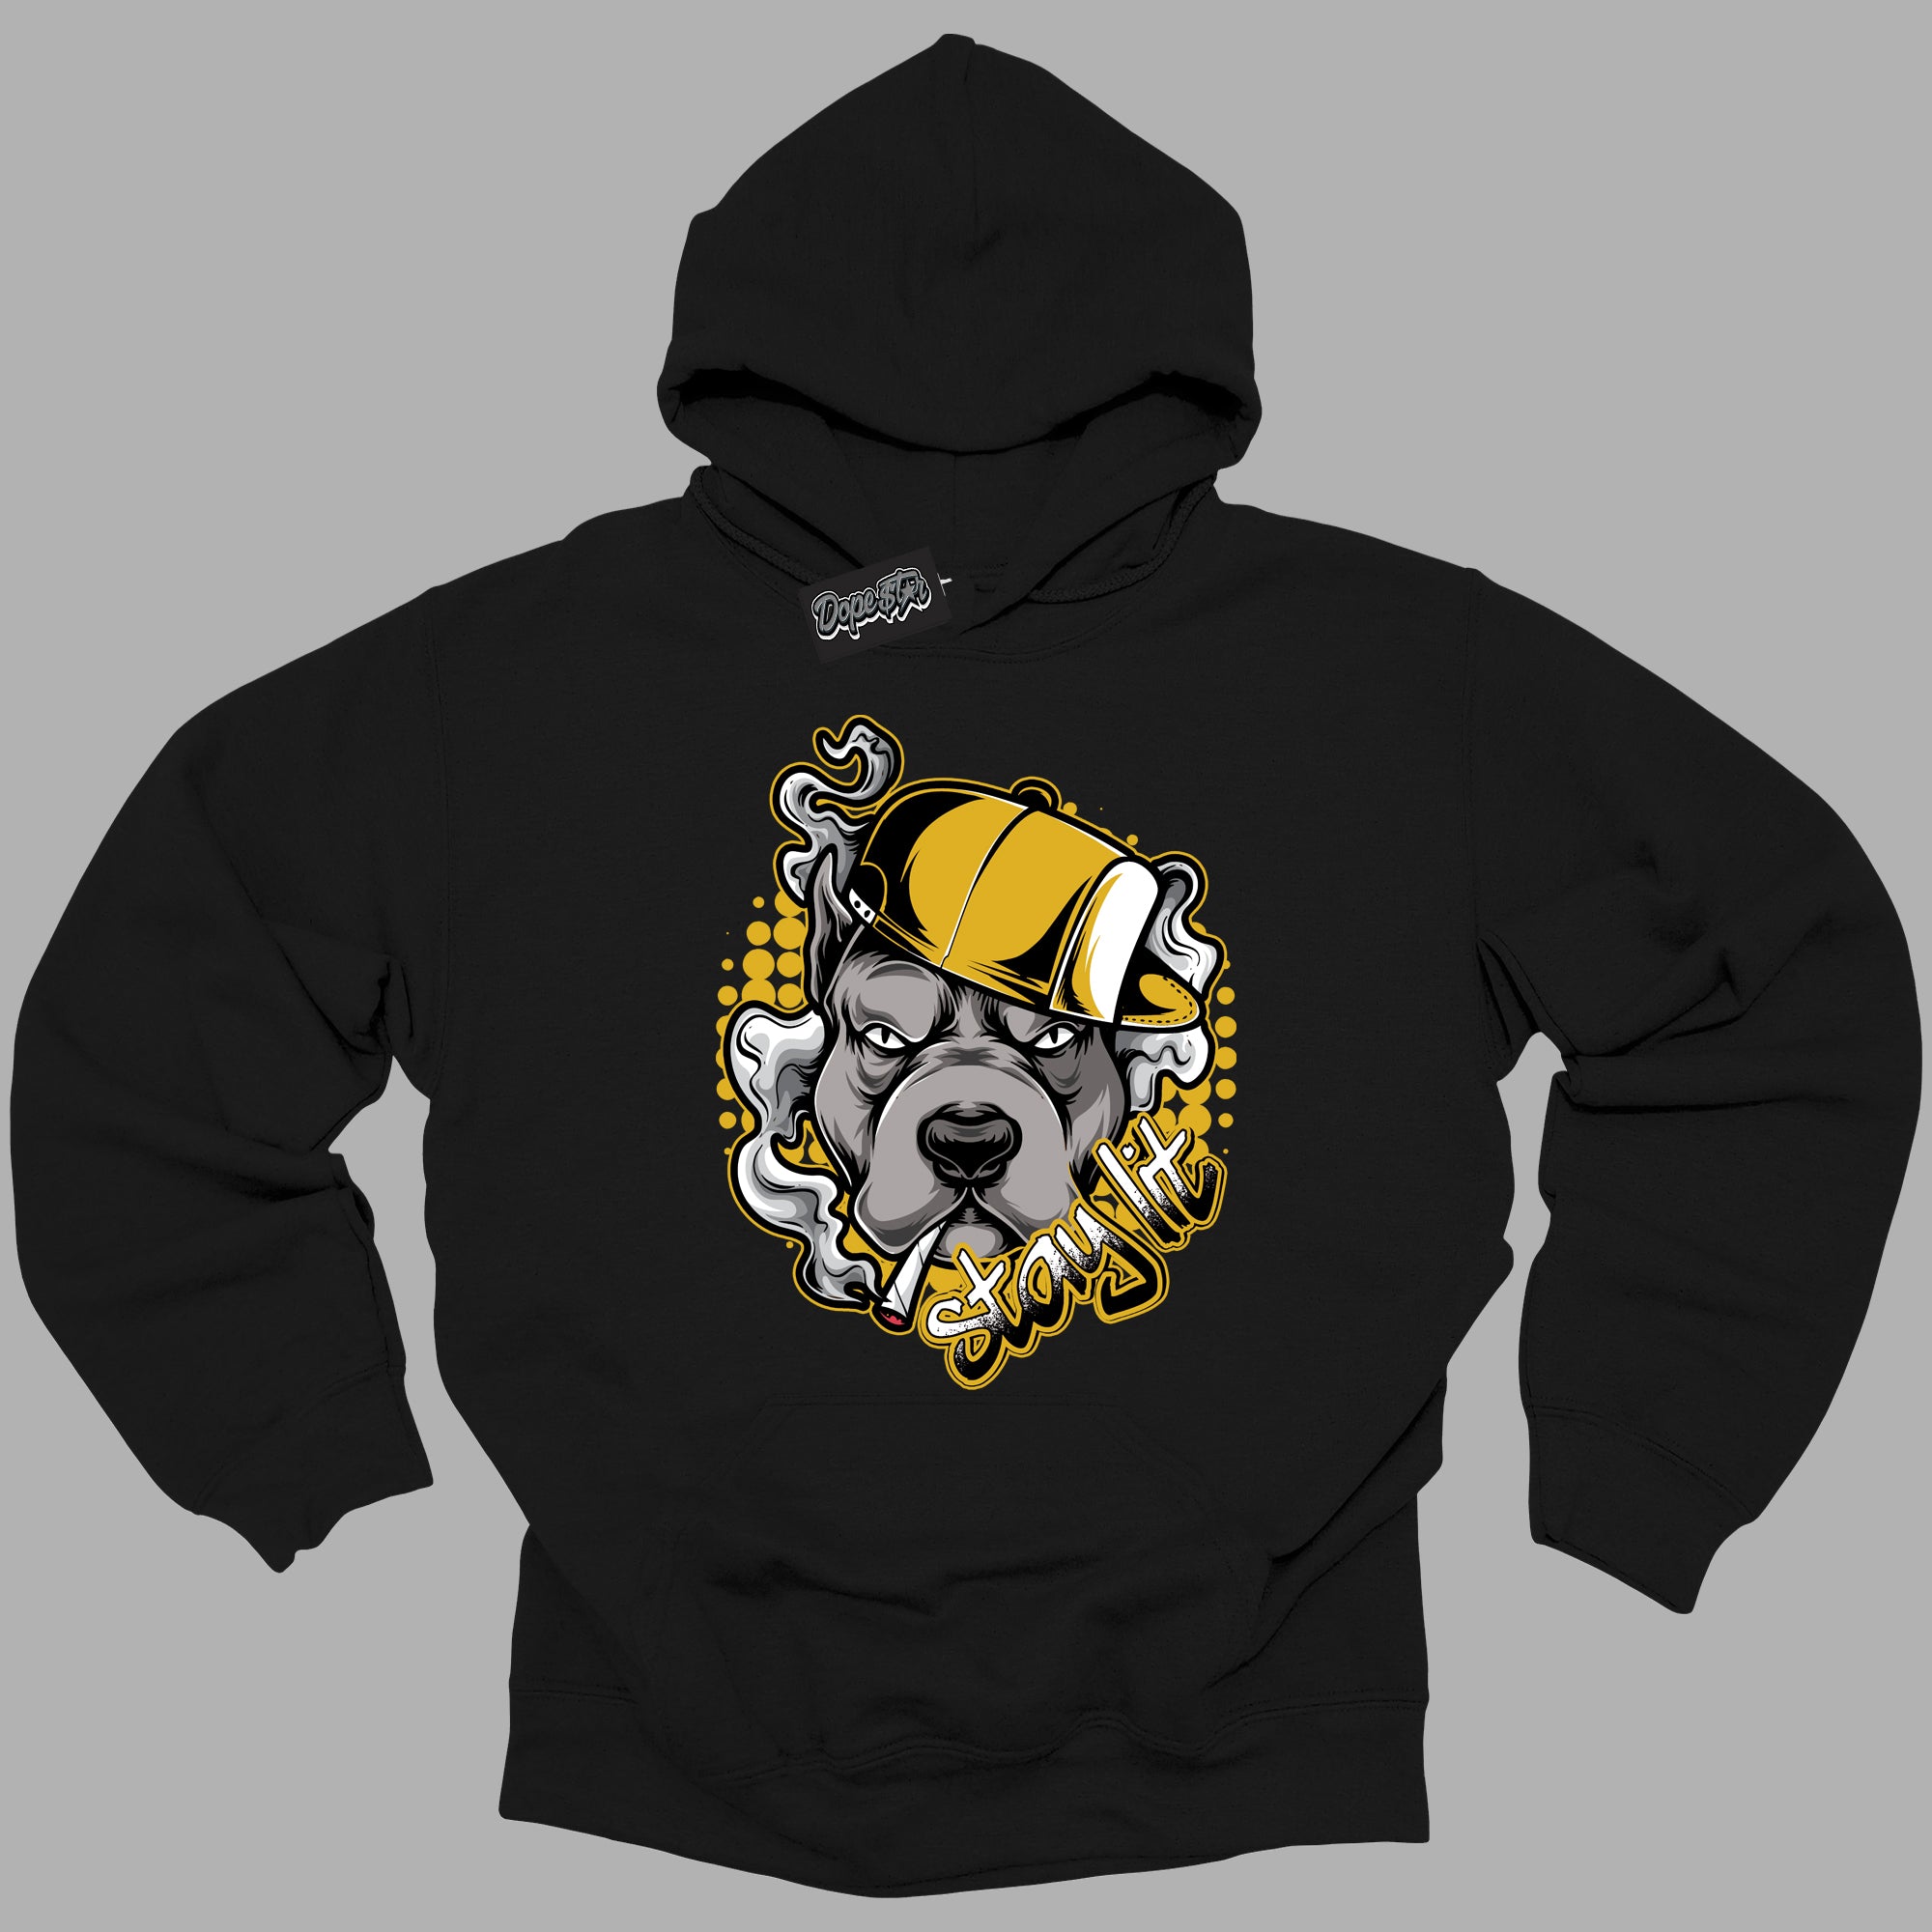 Cool Black Hoodie with “ Stay Lit ”  design that Perfectly Matches Yellow Ochre 6s Sneakers.